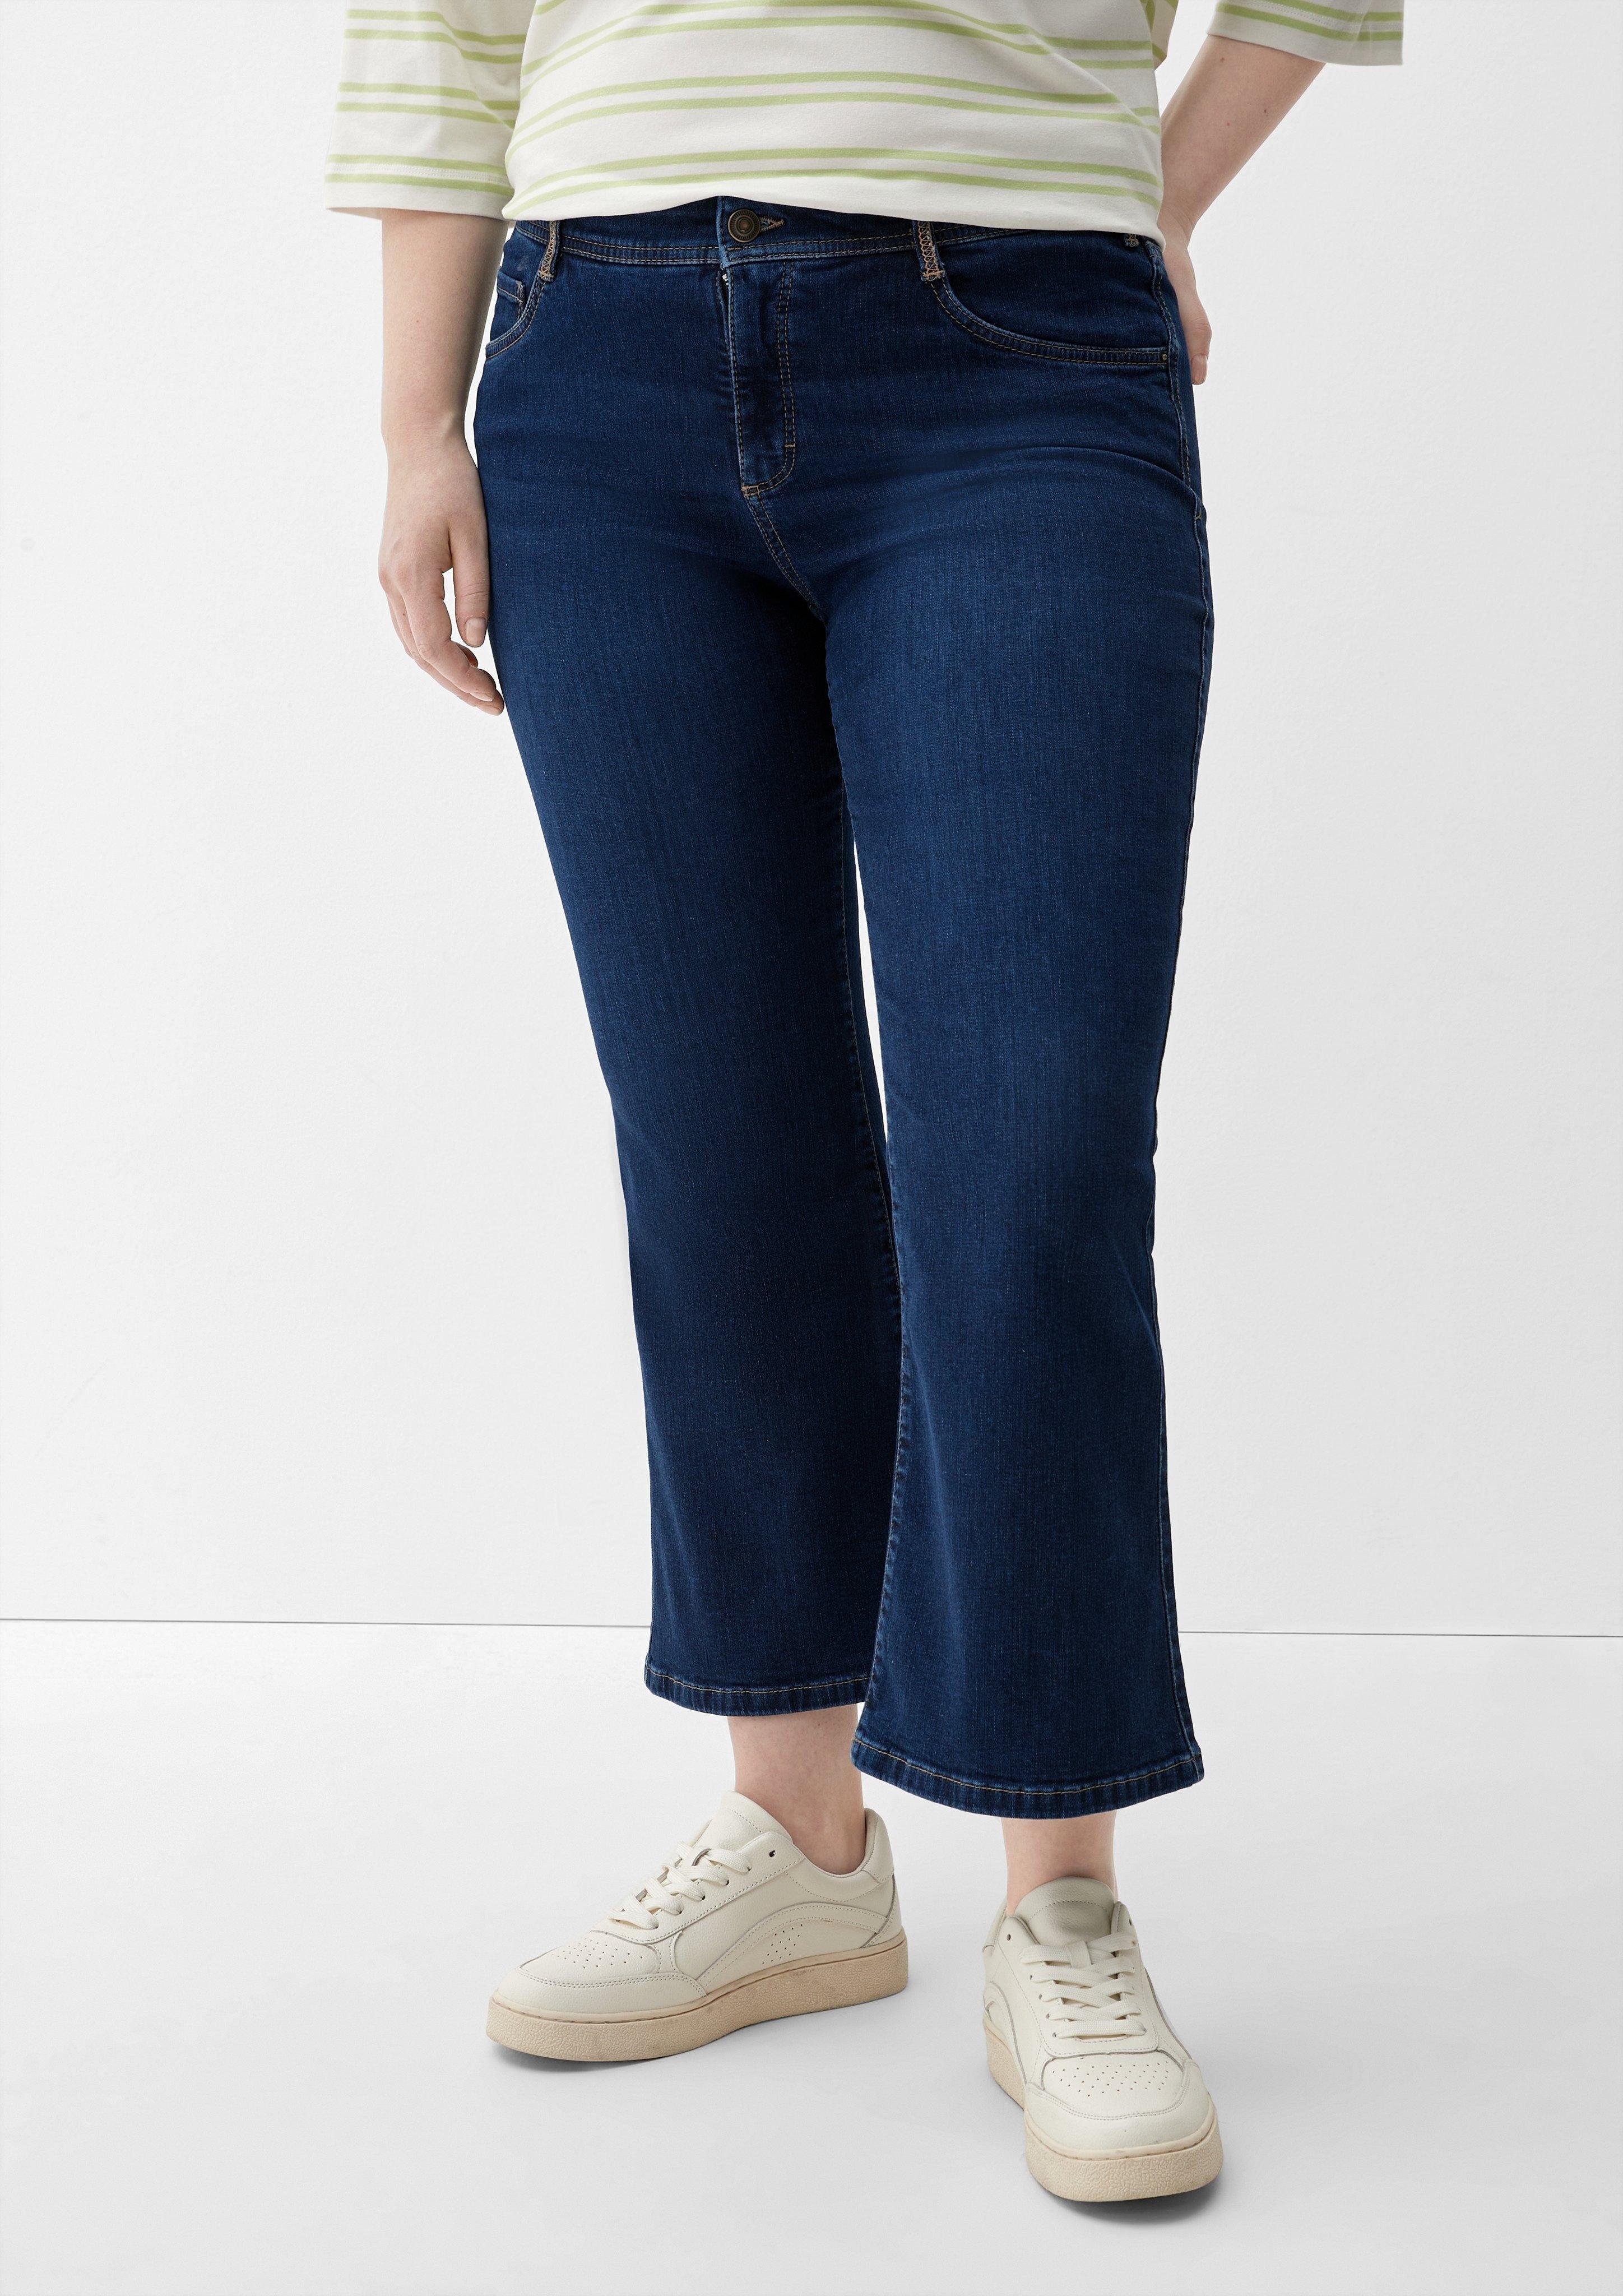 Waschung Flared Ankle-Jeans TRIANGLE Stoffhose leg mit Skinny: